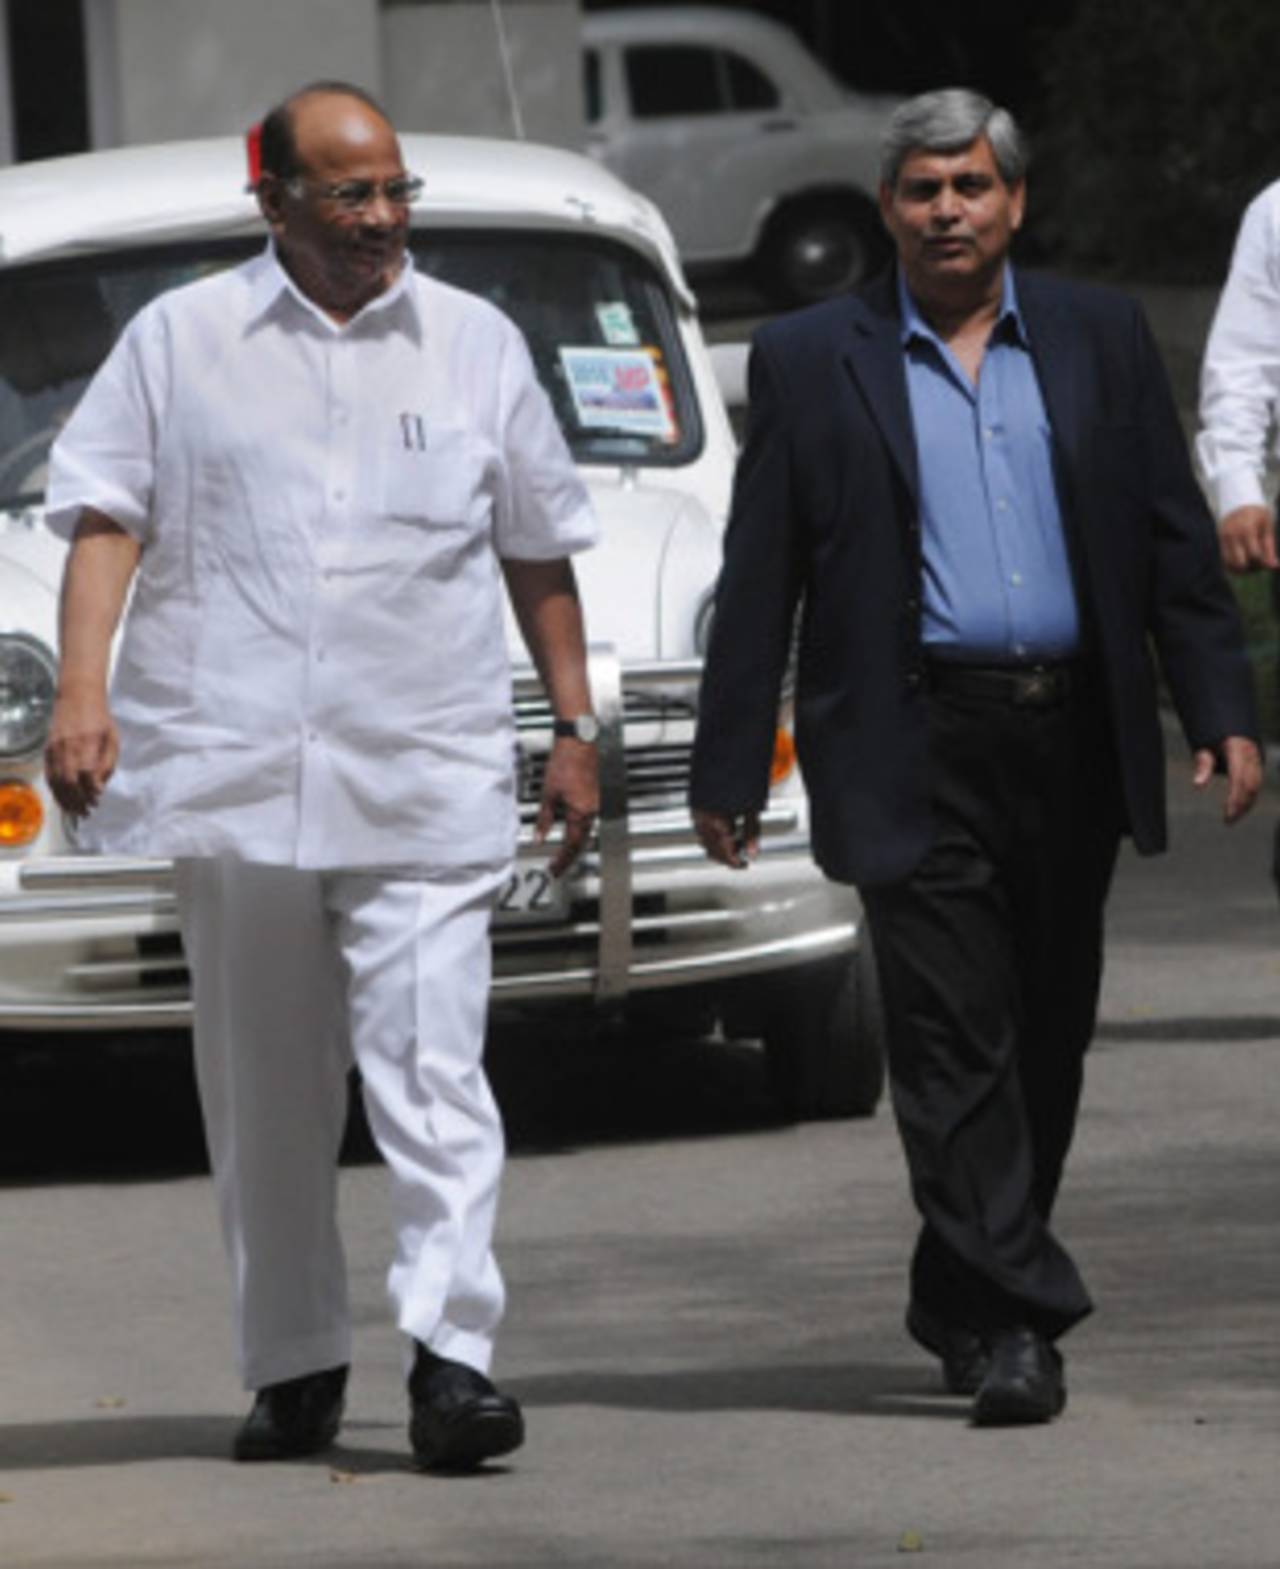 Sharad Pawar (left): "Had I used any influence, do you think it [City Corp] would have lost the bid?"&nbsp;&nbsp;&bull;&nbsp;&nbsp;AFP